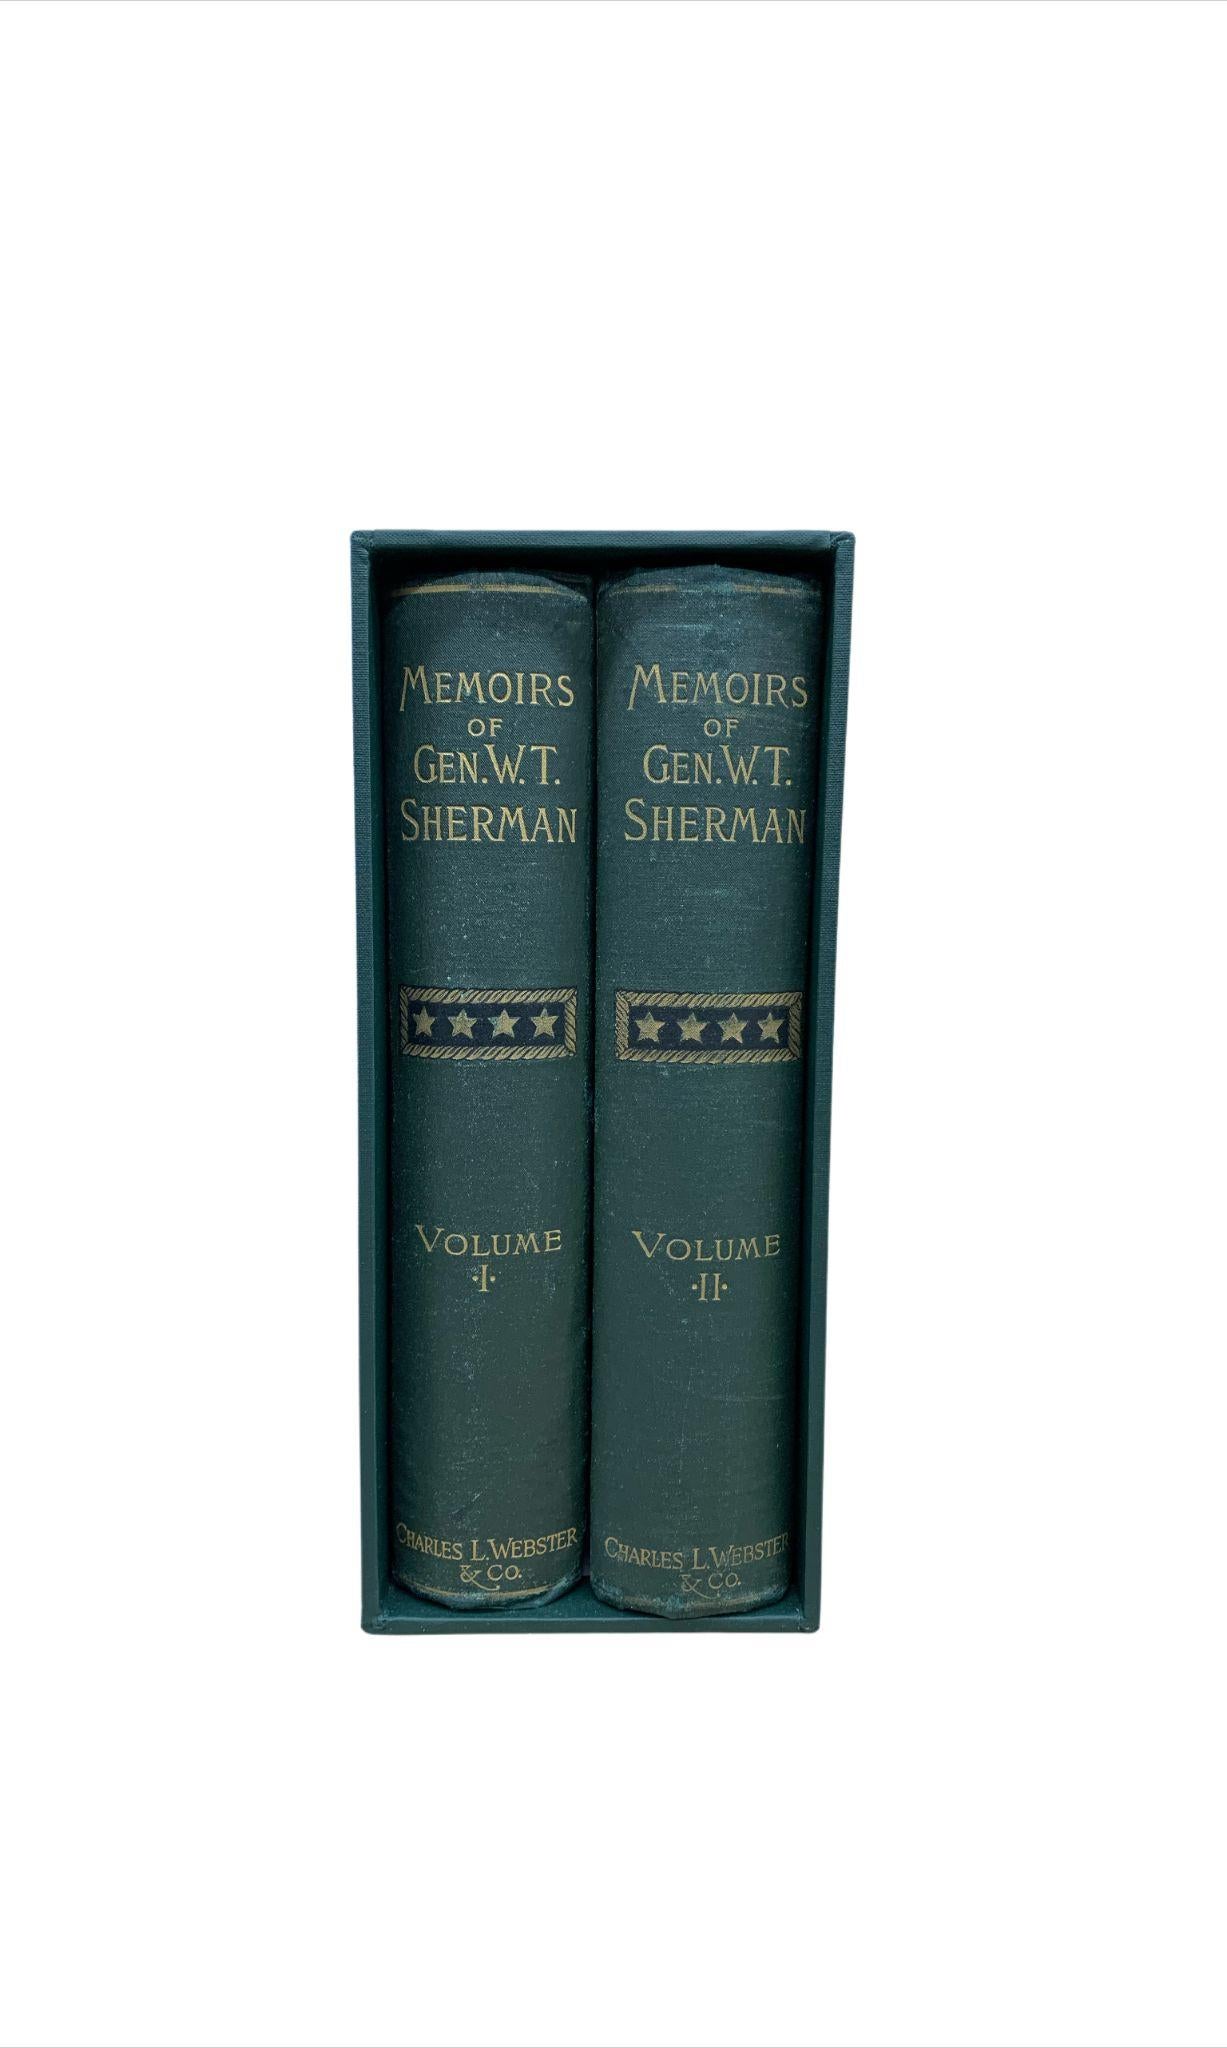 Sherman, William Tecumseh. Memoirs of Gen. W. T. Sherman, Written by Himself. New York: Charles L. Webster & Co., 1891. Shoulder Strap Fourth Edition. Two-Volumes. 

This two-volume set of William T. Sherman’s Memoirs is the fourth edition and part